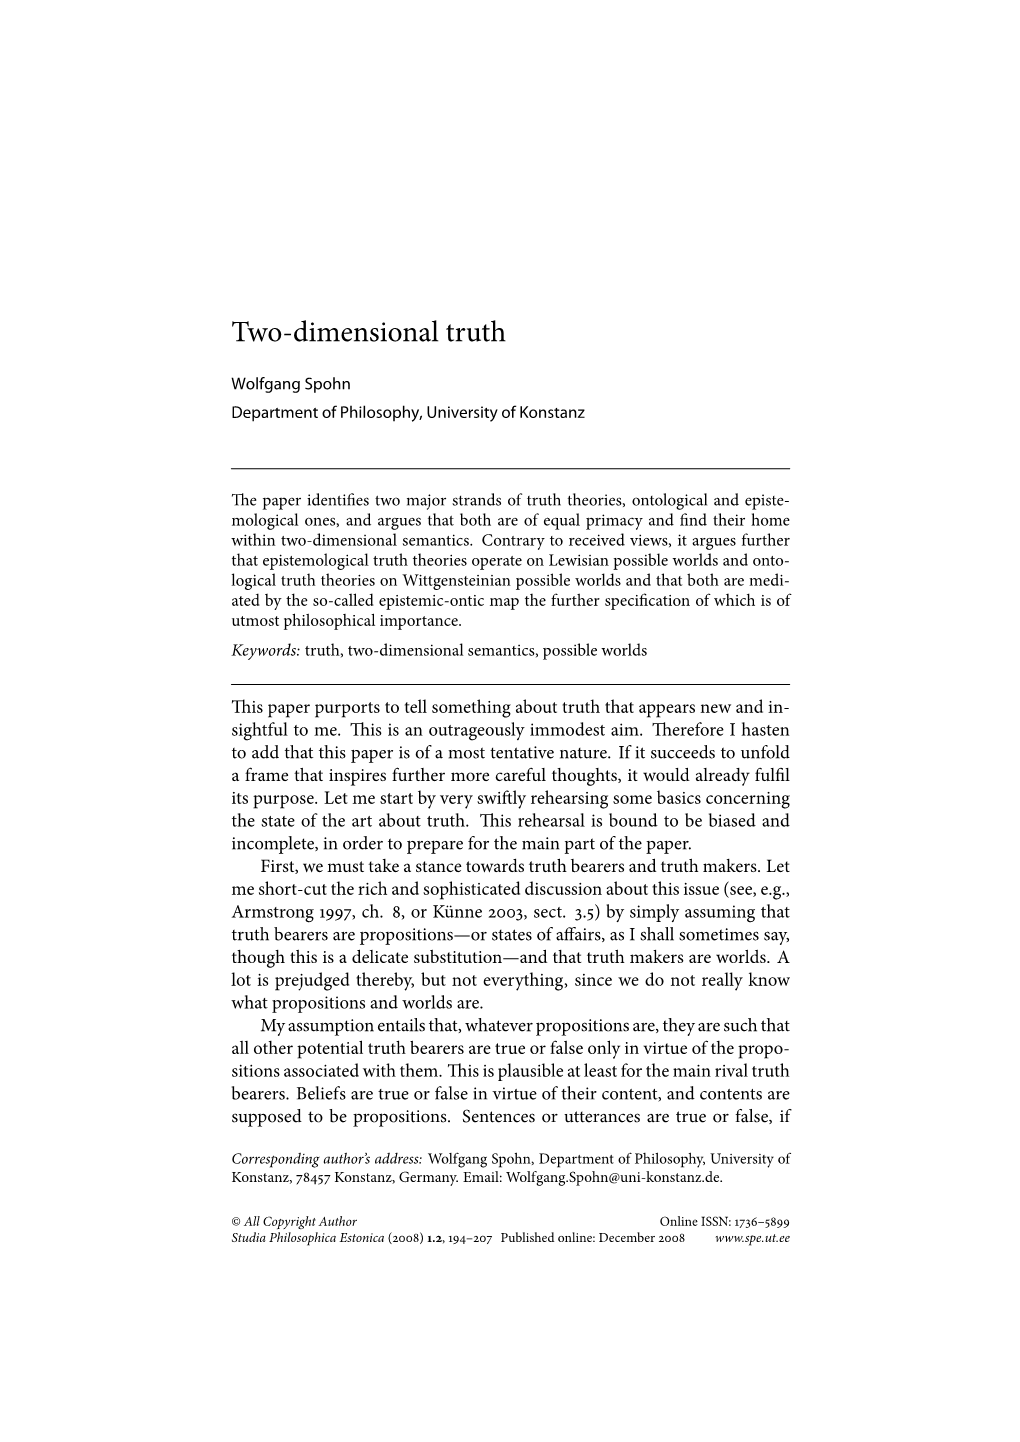 Two-Dimensional Truth